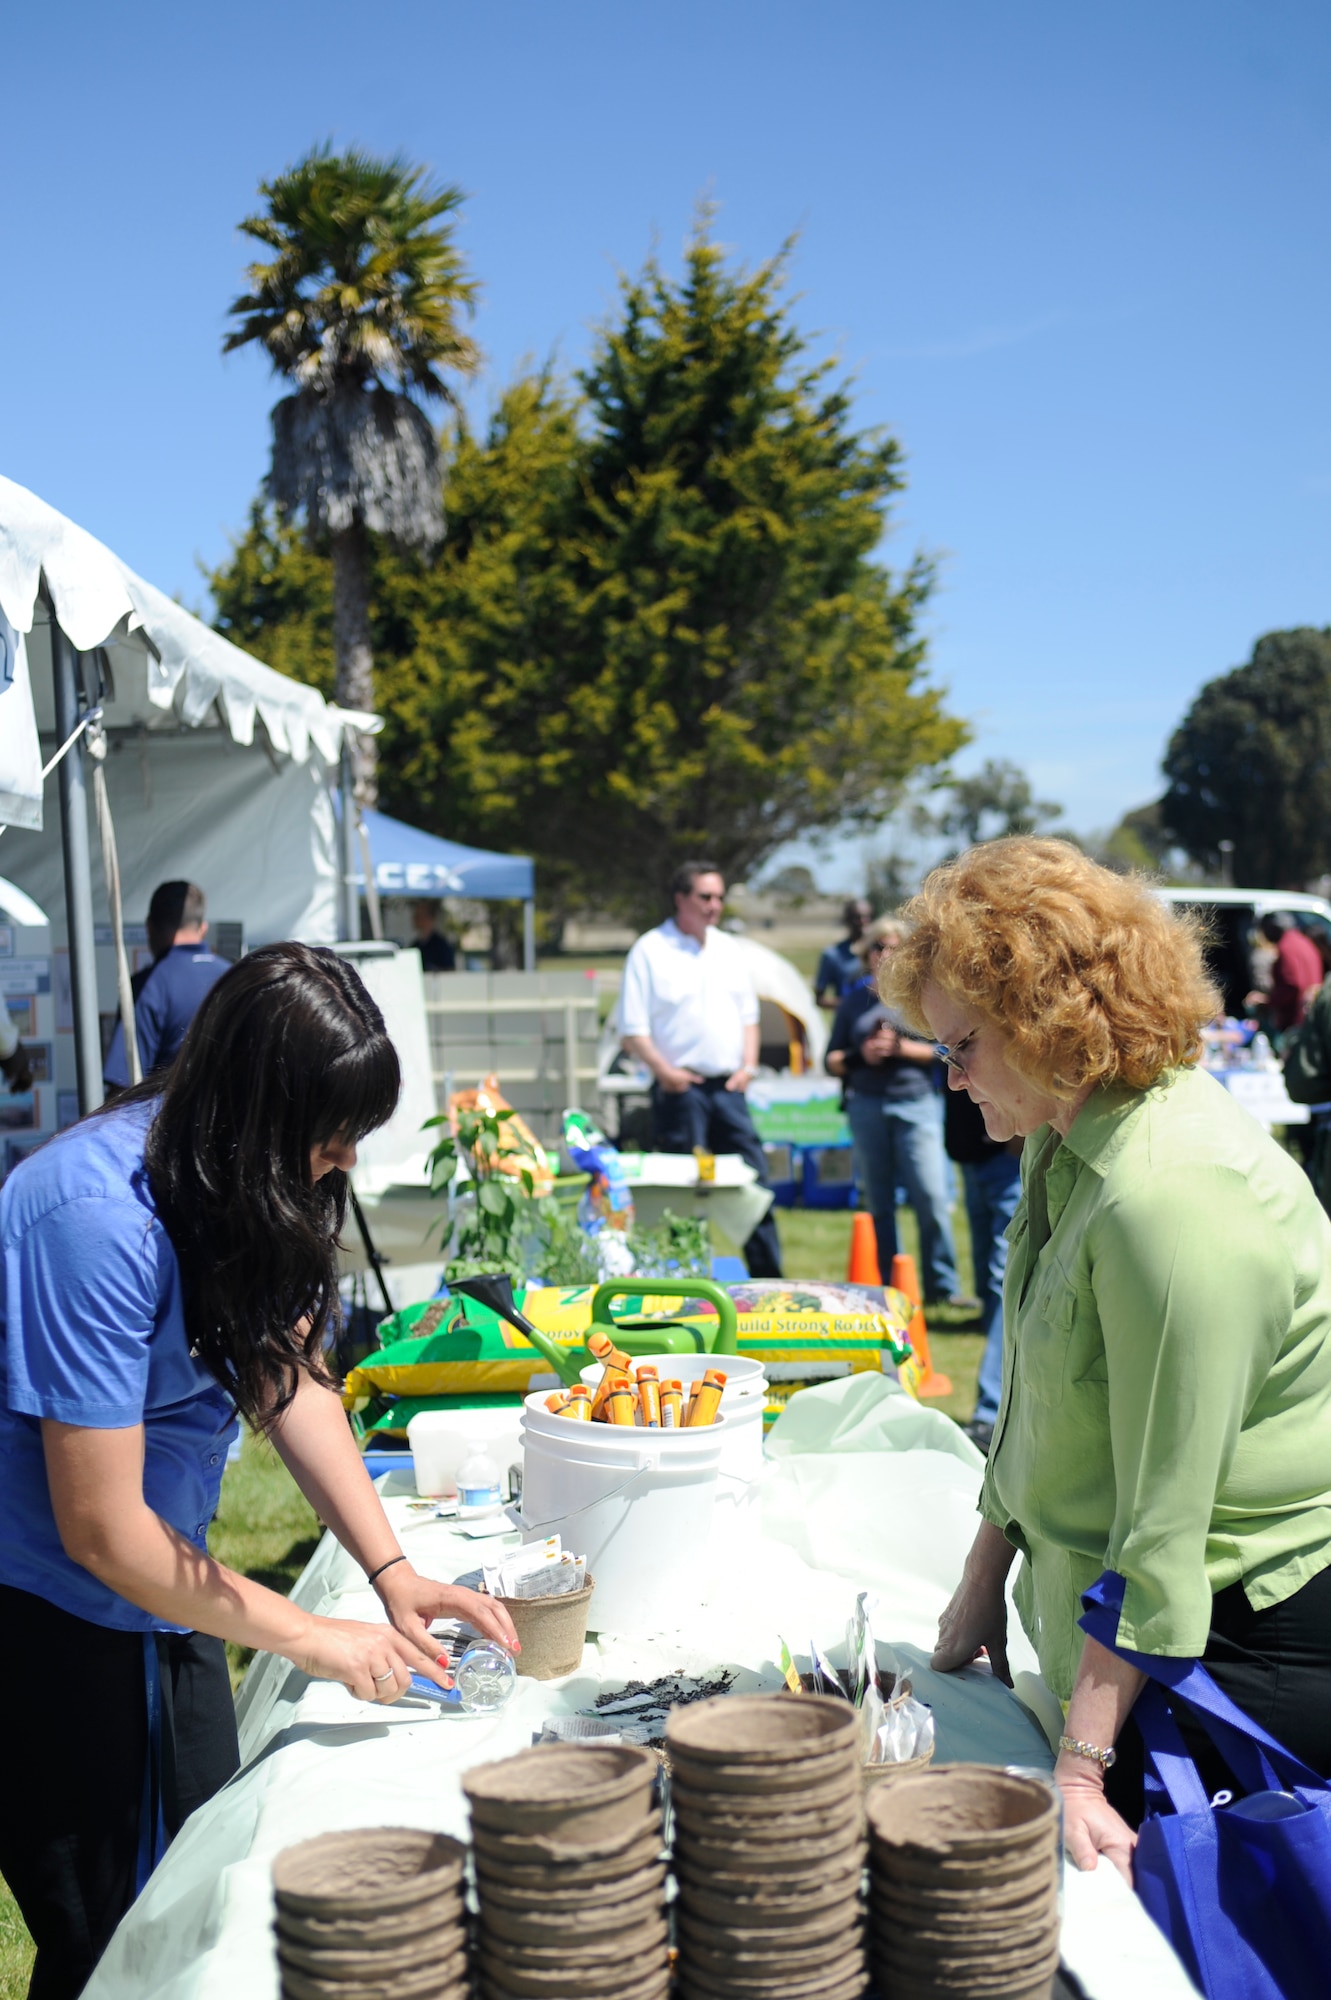 VANDENBERG AIR FORCE BASE, Calif. --Brandi Lytle, a Balfour Beatty LifeWorks coordinator, creates a miniature greenhouse out of recycled material during an Earth Day event here Wednesday, April 18, 2012. More than 25 base and local organizations participated in this environmental awareness campaign. (U.S. Air Force photo/Staff Sgt. Andrew Satran) 

 

 